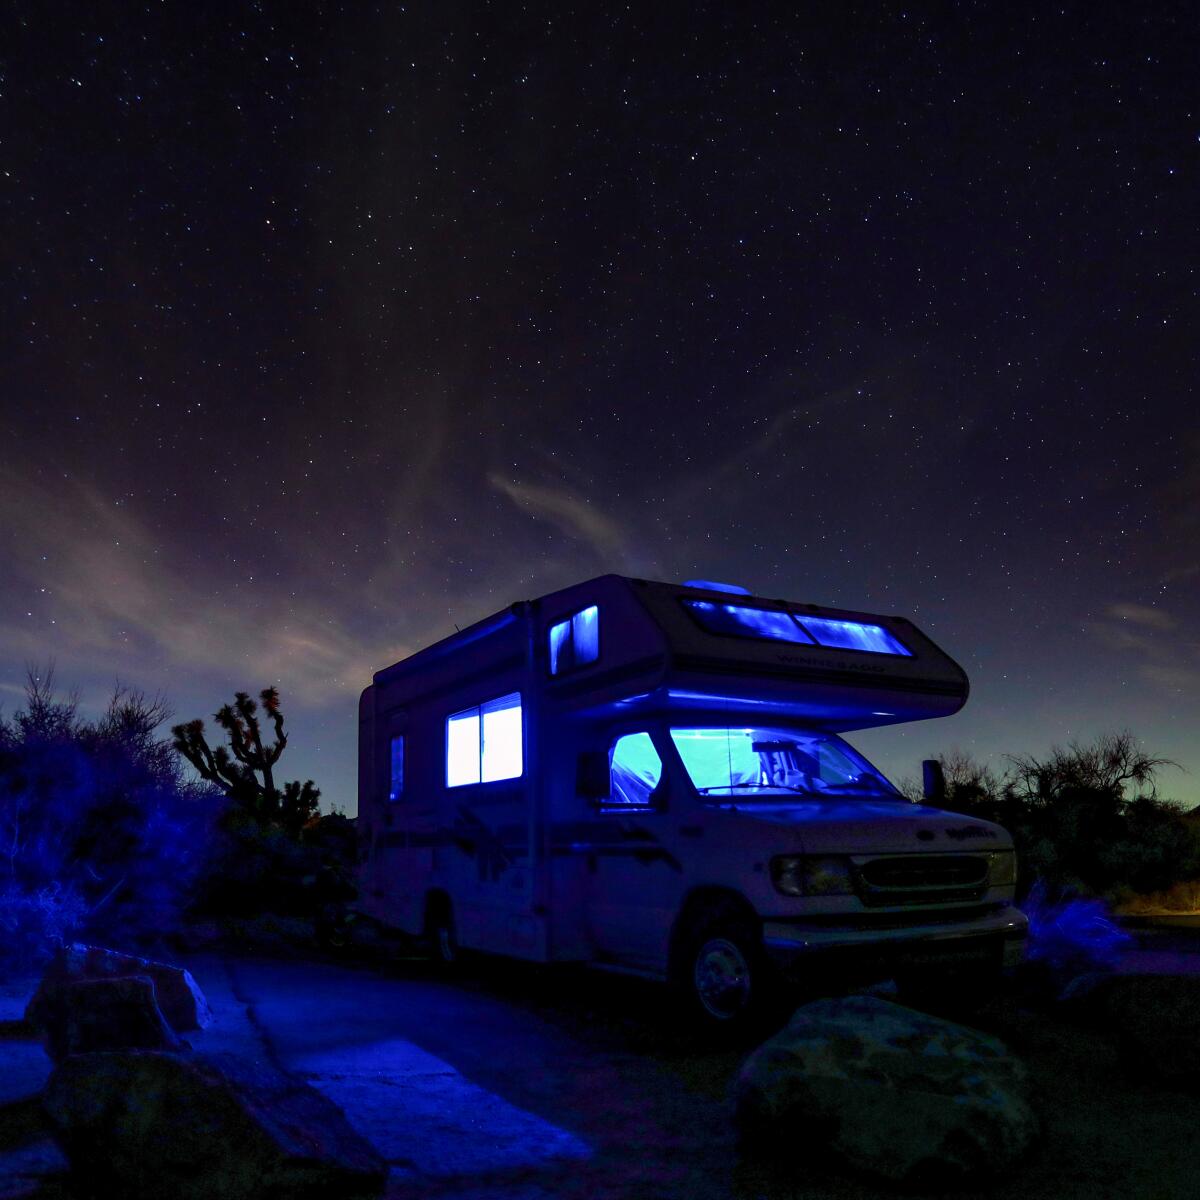 An RV camper and night sky in Joshua Tree National Park 